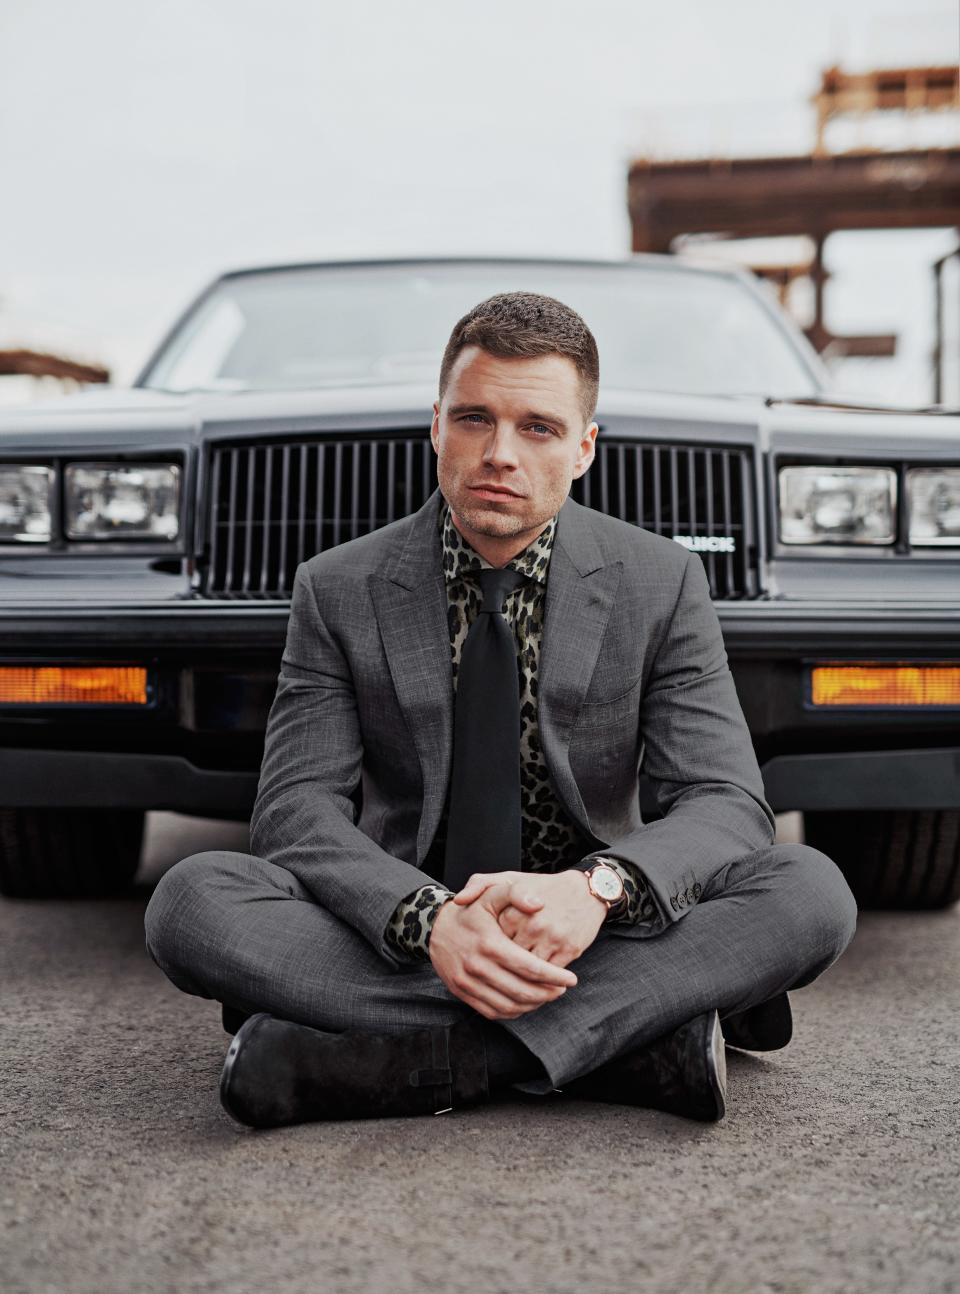 Yes, this is the era of wild style, but the suit remains relevant—especially when it's got wide lapels and a whole lot of swagger. So we thought: Who better to wear it than Sebastian Stan? The Avengers’ Bucky Barnes is keeping the old archetype of the handsome action hero interesting with a mix of legit chops and surprising range.